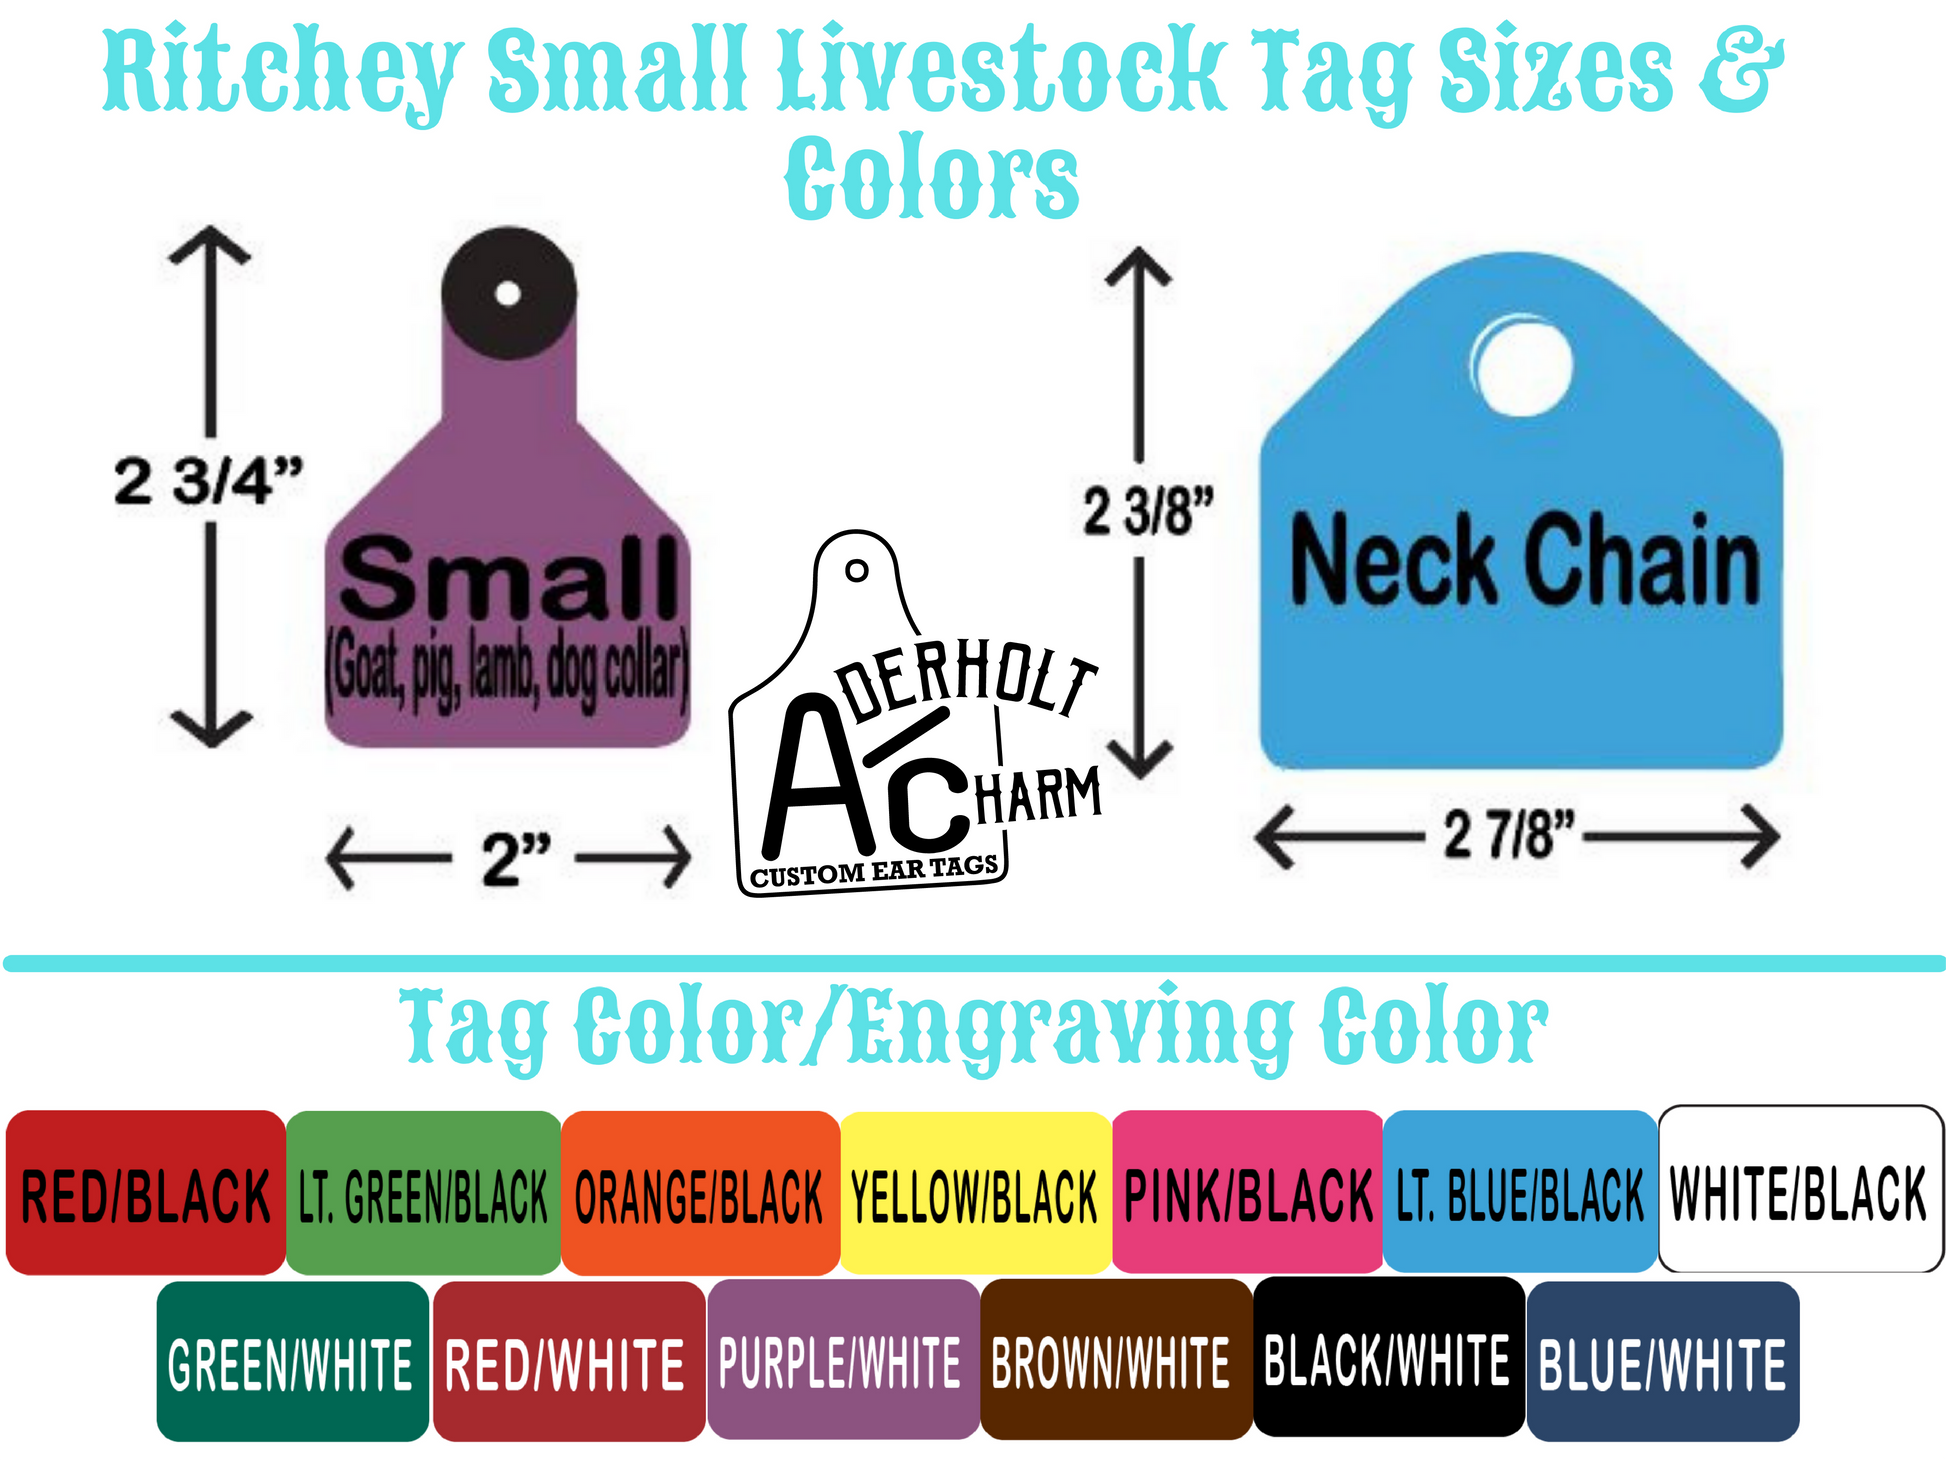 Custom Engraved Ritchey Goat/Small Livestock Tags – Aderholt Charm - Custom  Ear Tags & More